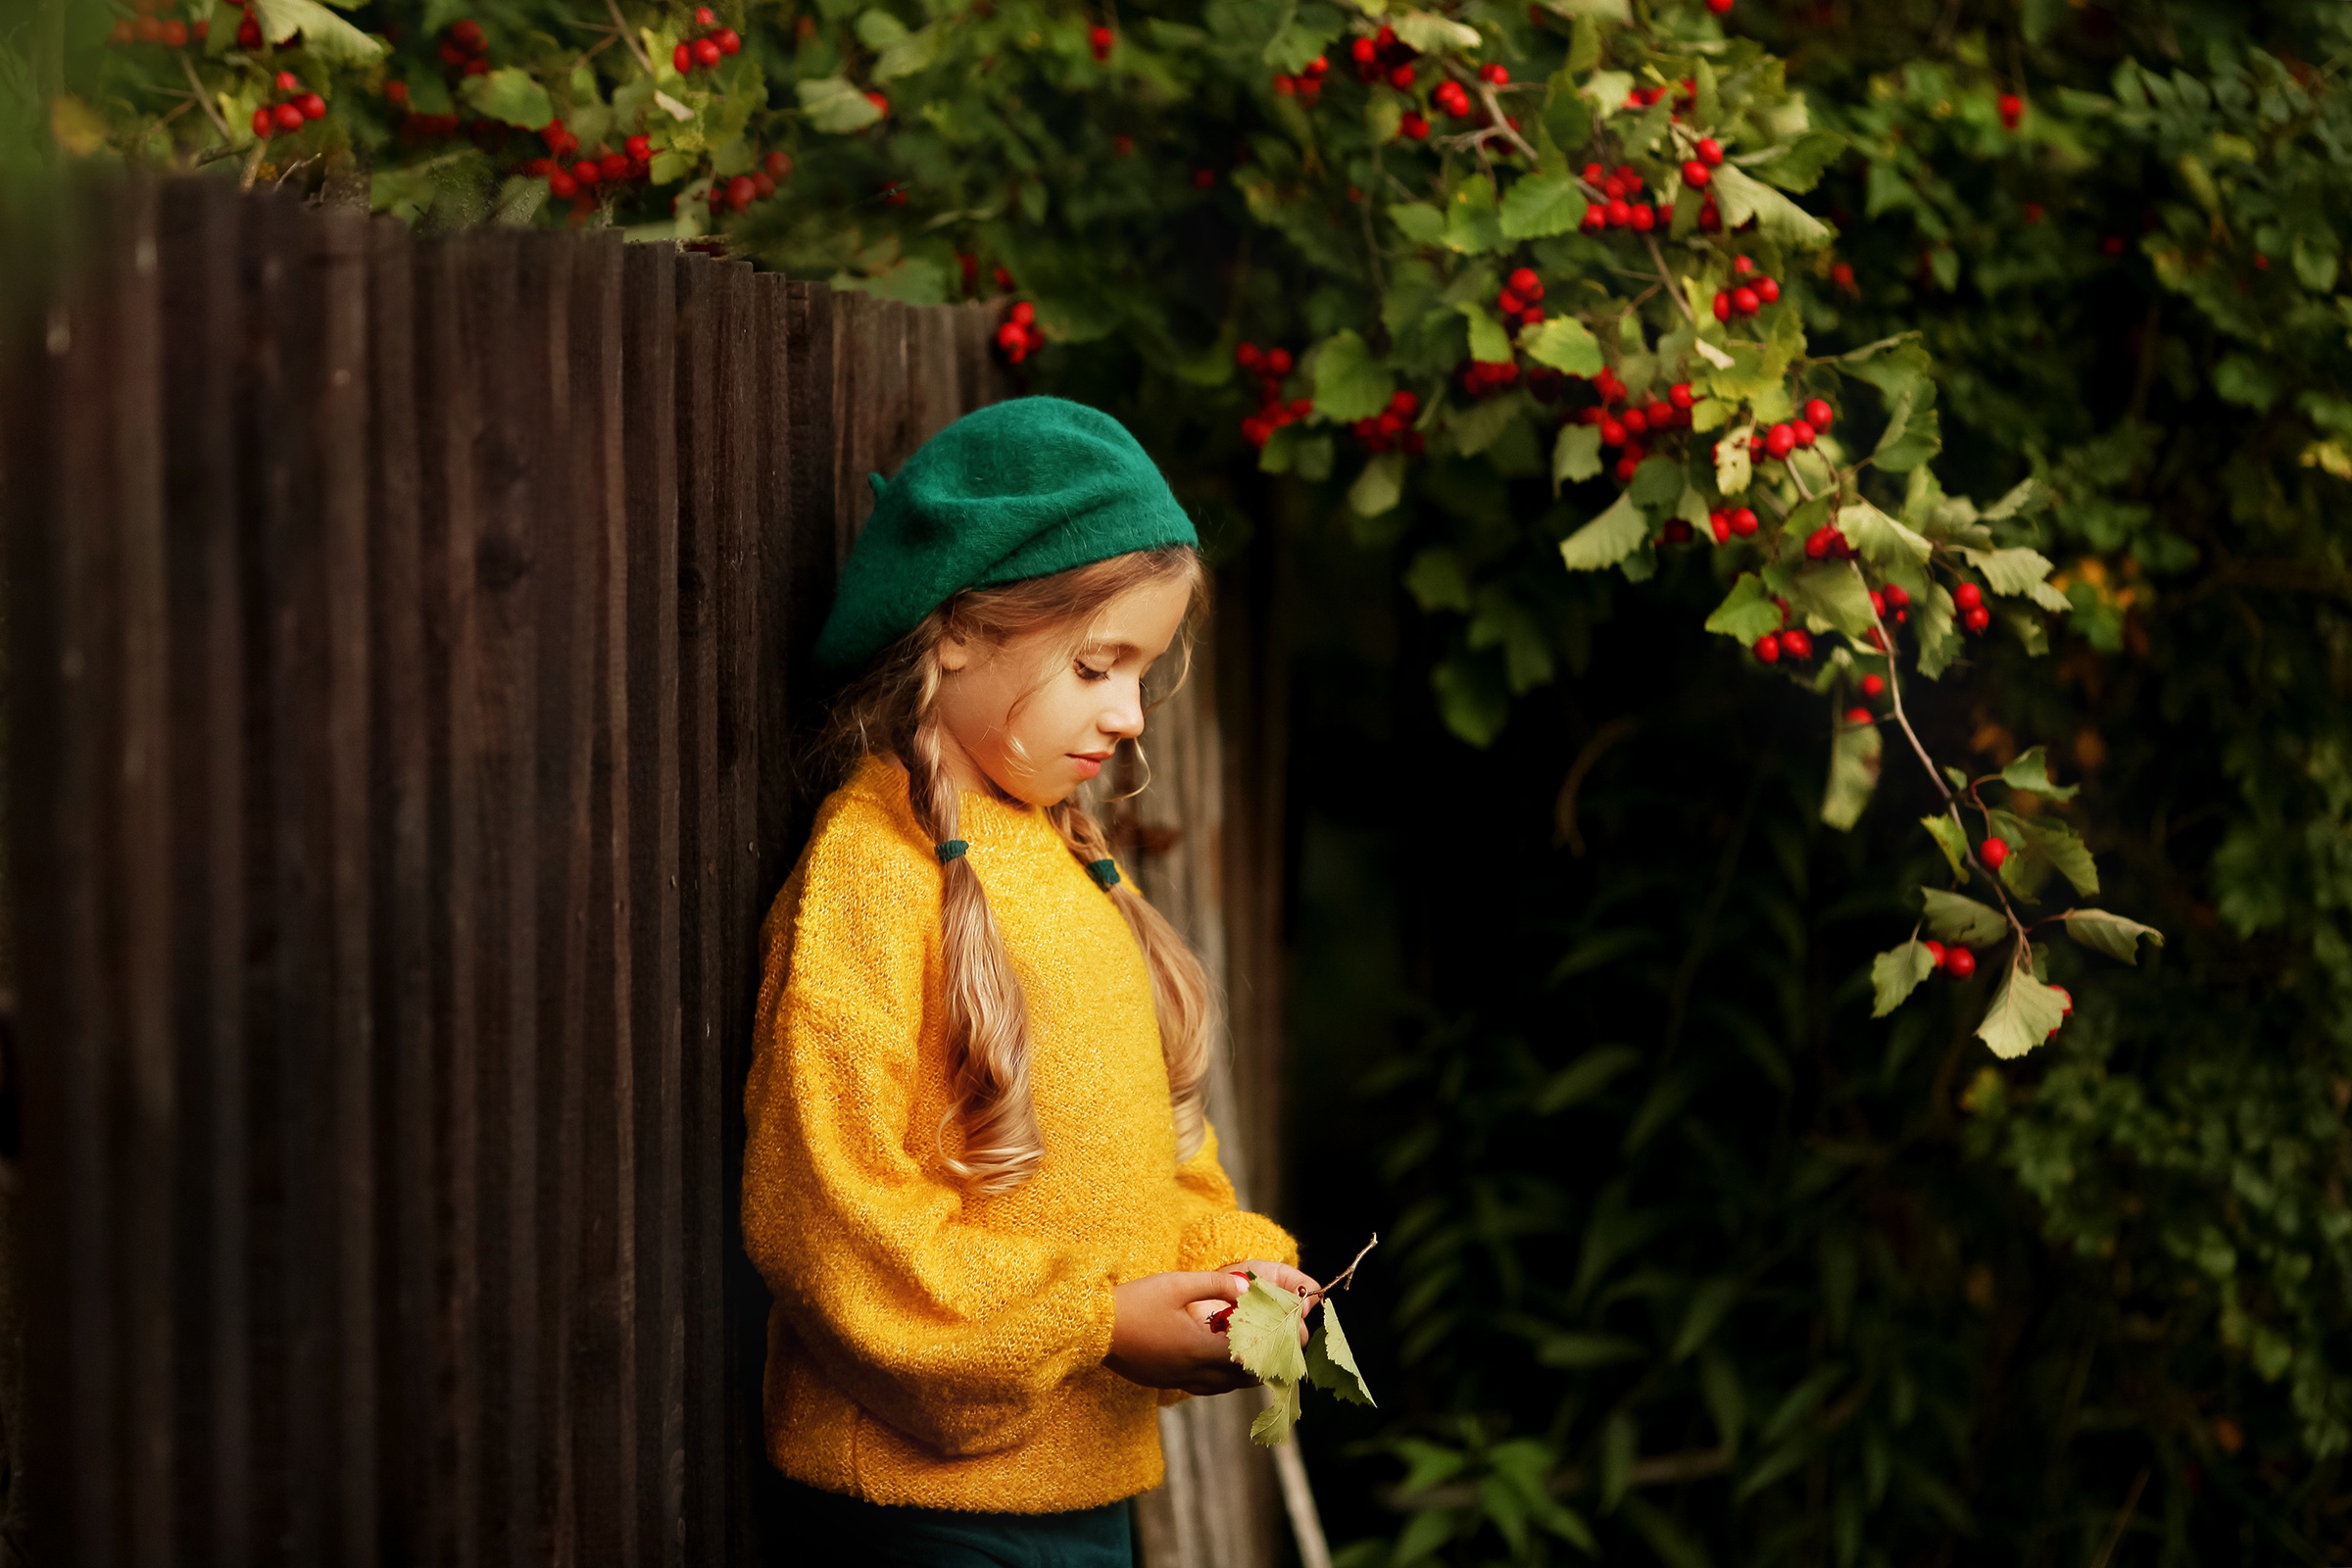 photography, child, beret, berry, fence, mood, pigtail